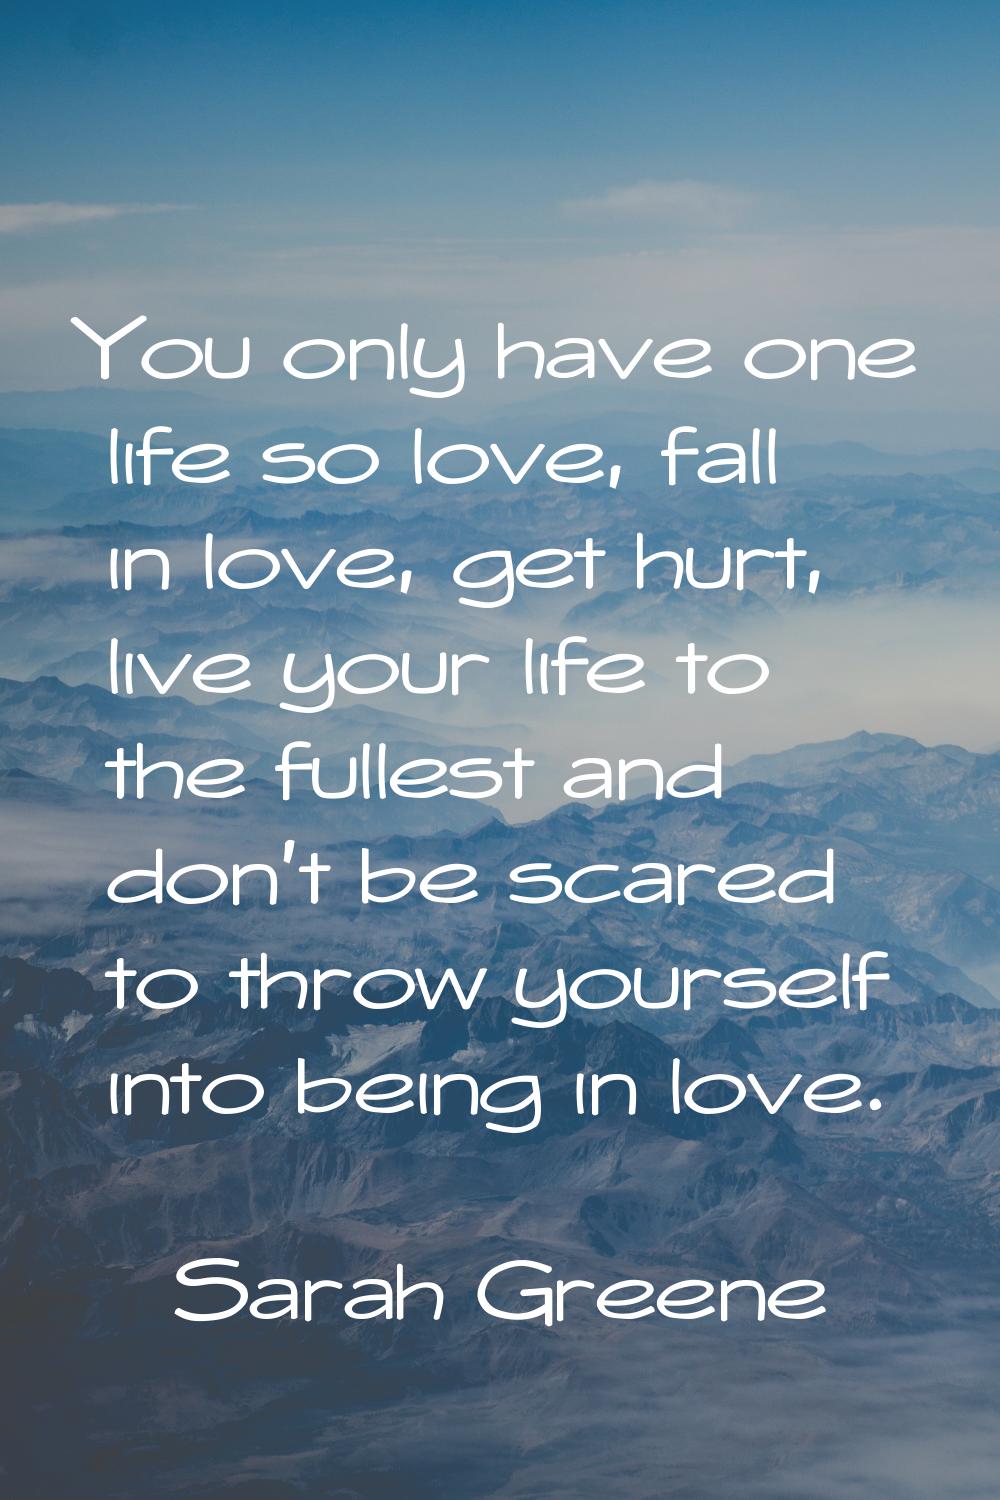 You only have one life so love, fall in love, get hurt, live your life to the fullest and don't be 